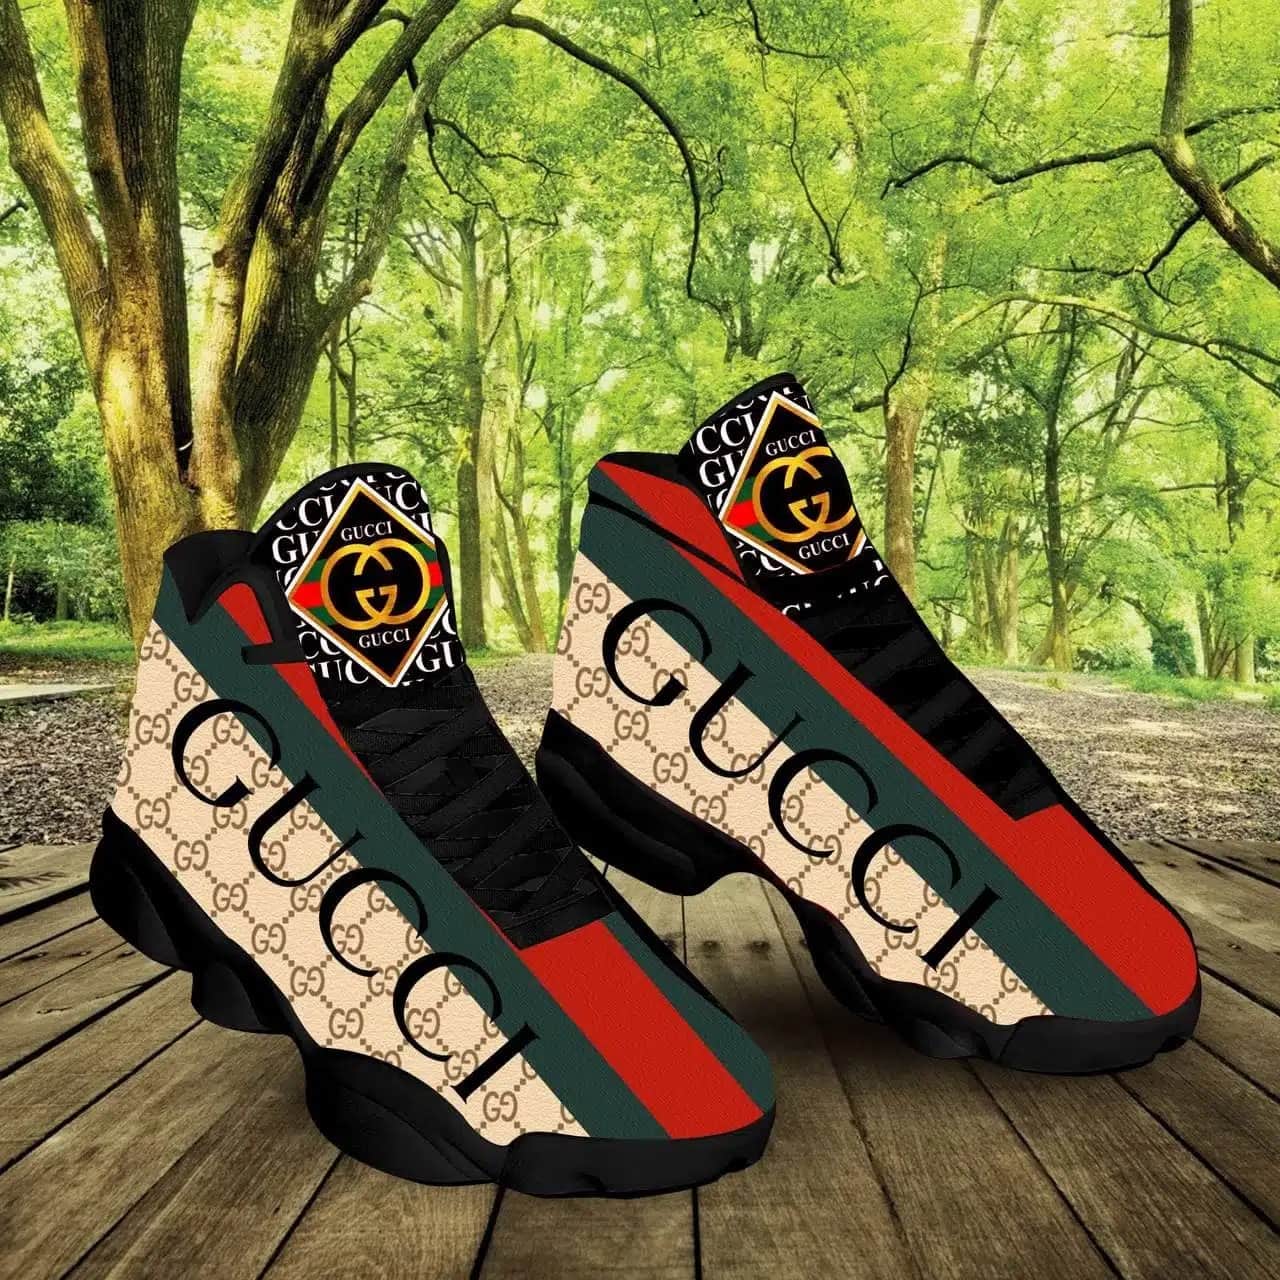 Top 5 Best-Selling Gucci Jordan 13 Shoes in 10/2023 at Himenshop - The ...